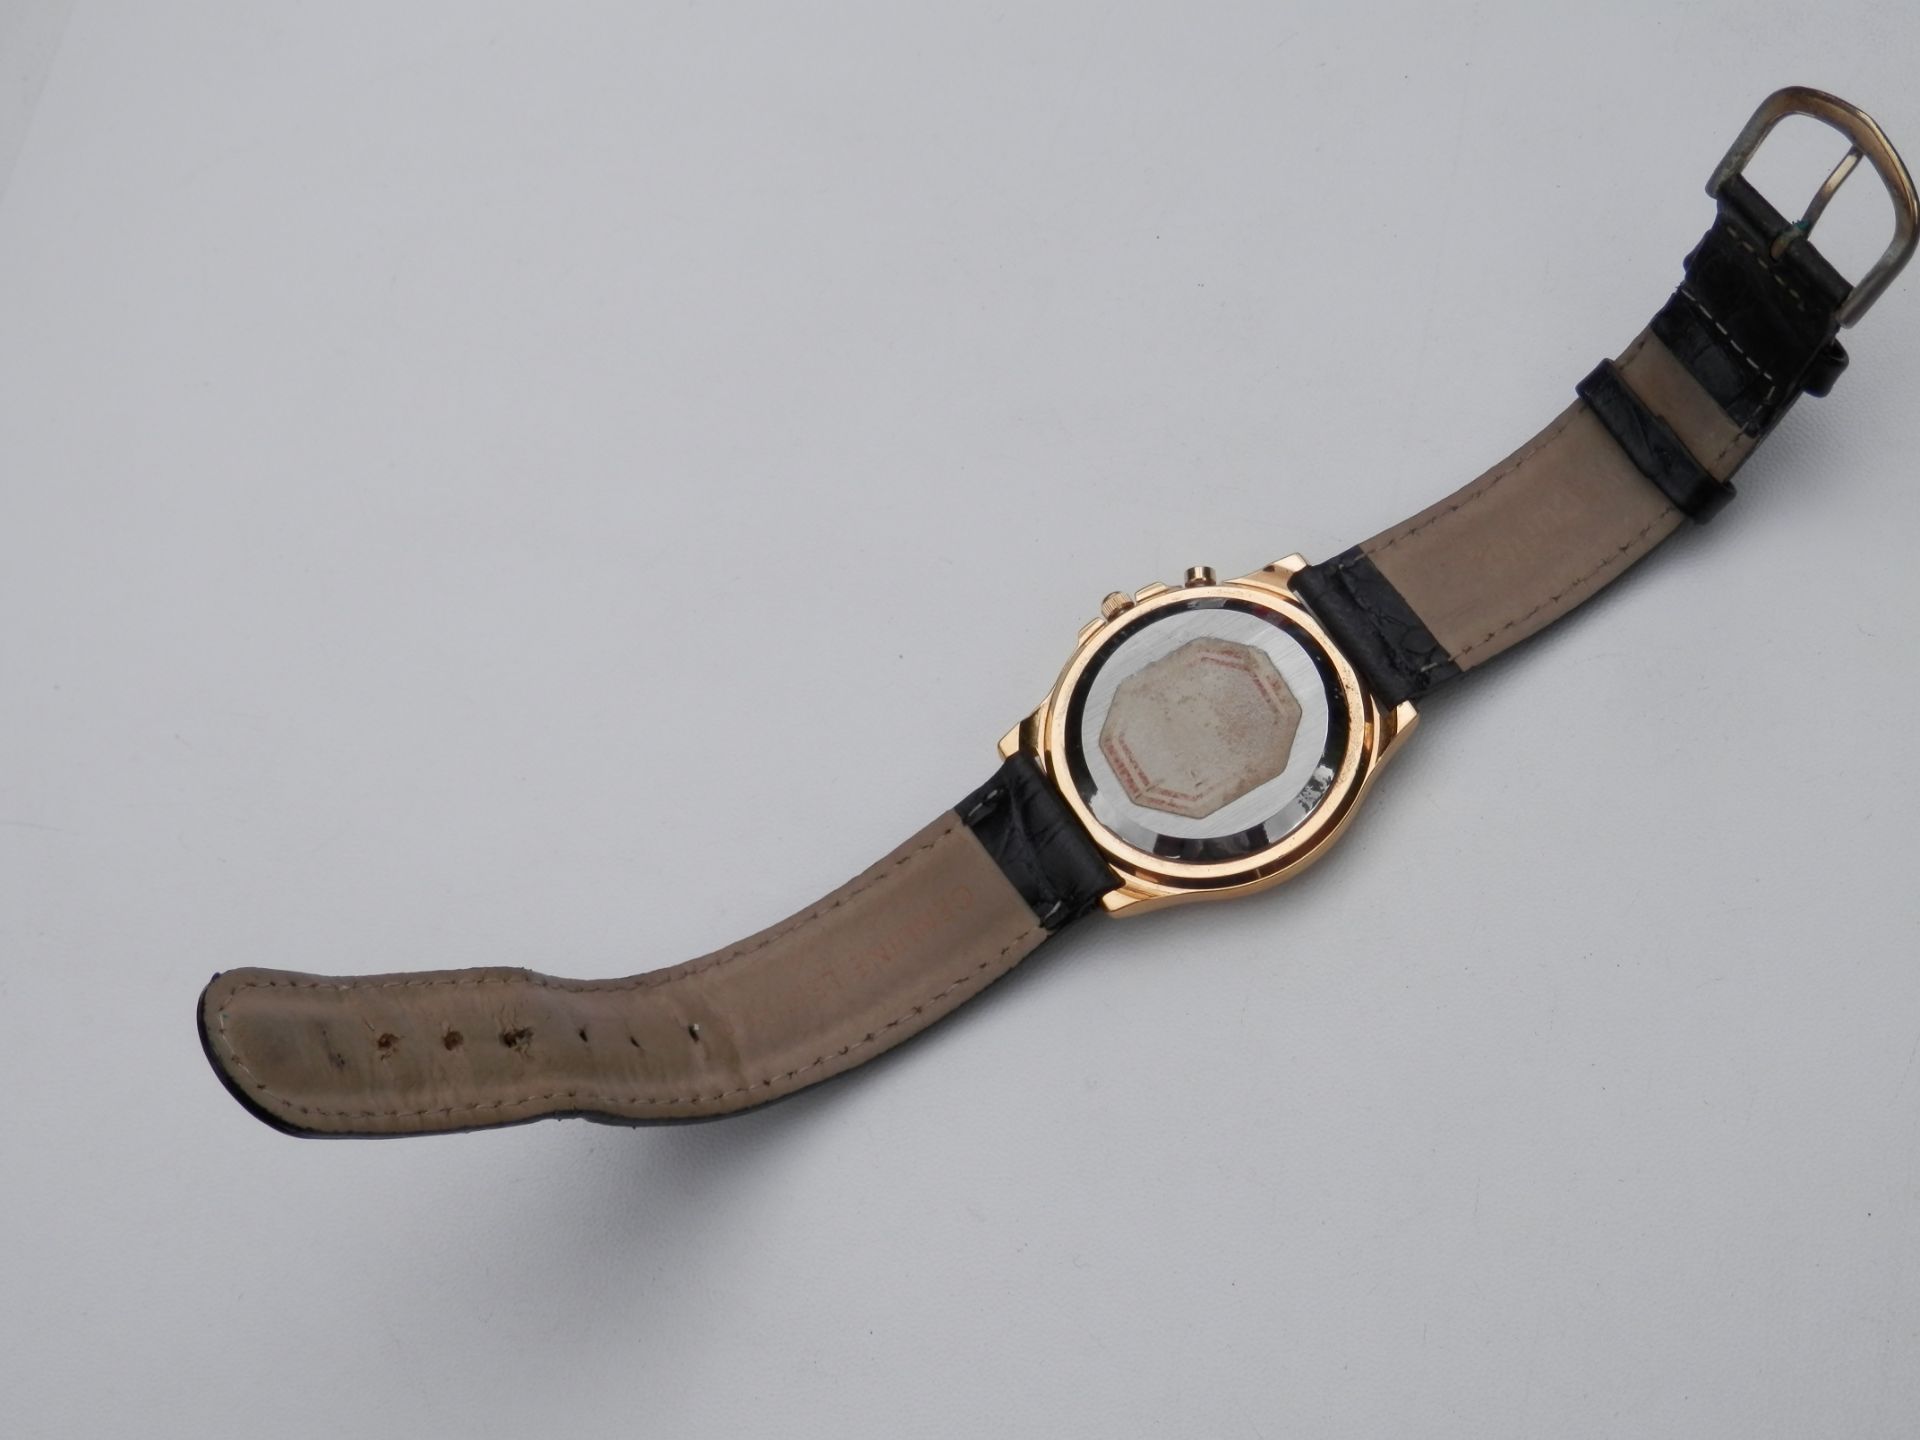 FULLY WORKING 1990S ACCURIST GENTS GOLD PLATED ANALOGUE ALARM QUARTZ WATCH, METALLIC BLUE DIAL. - Image 6 of 8